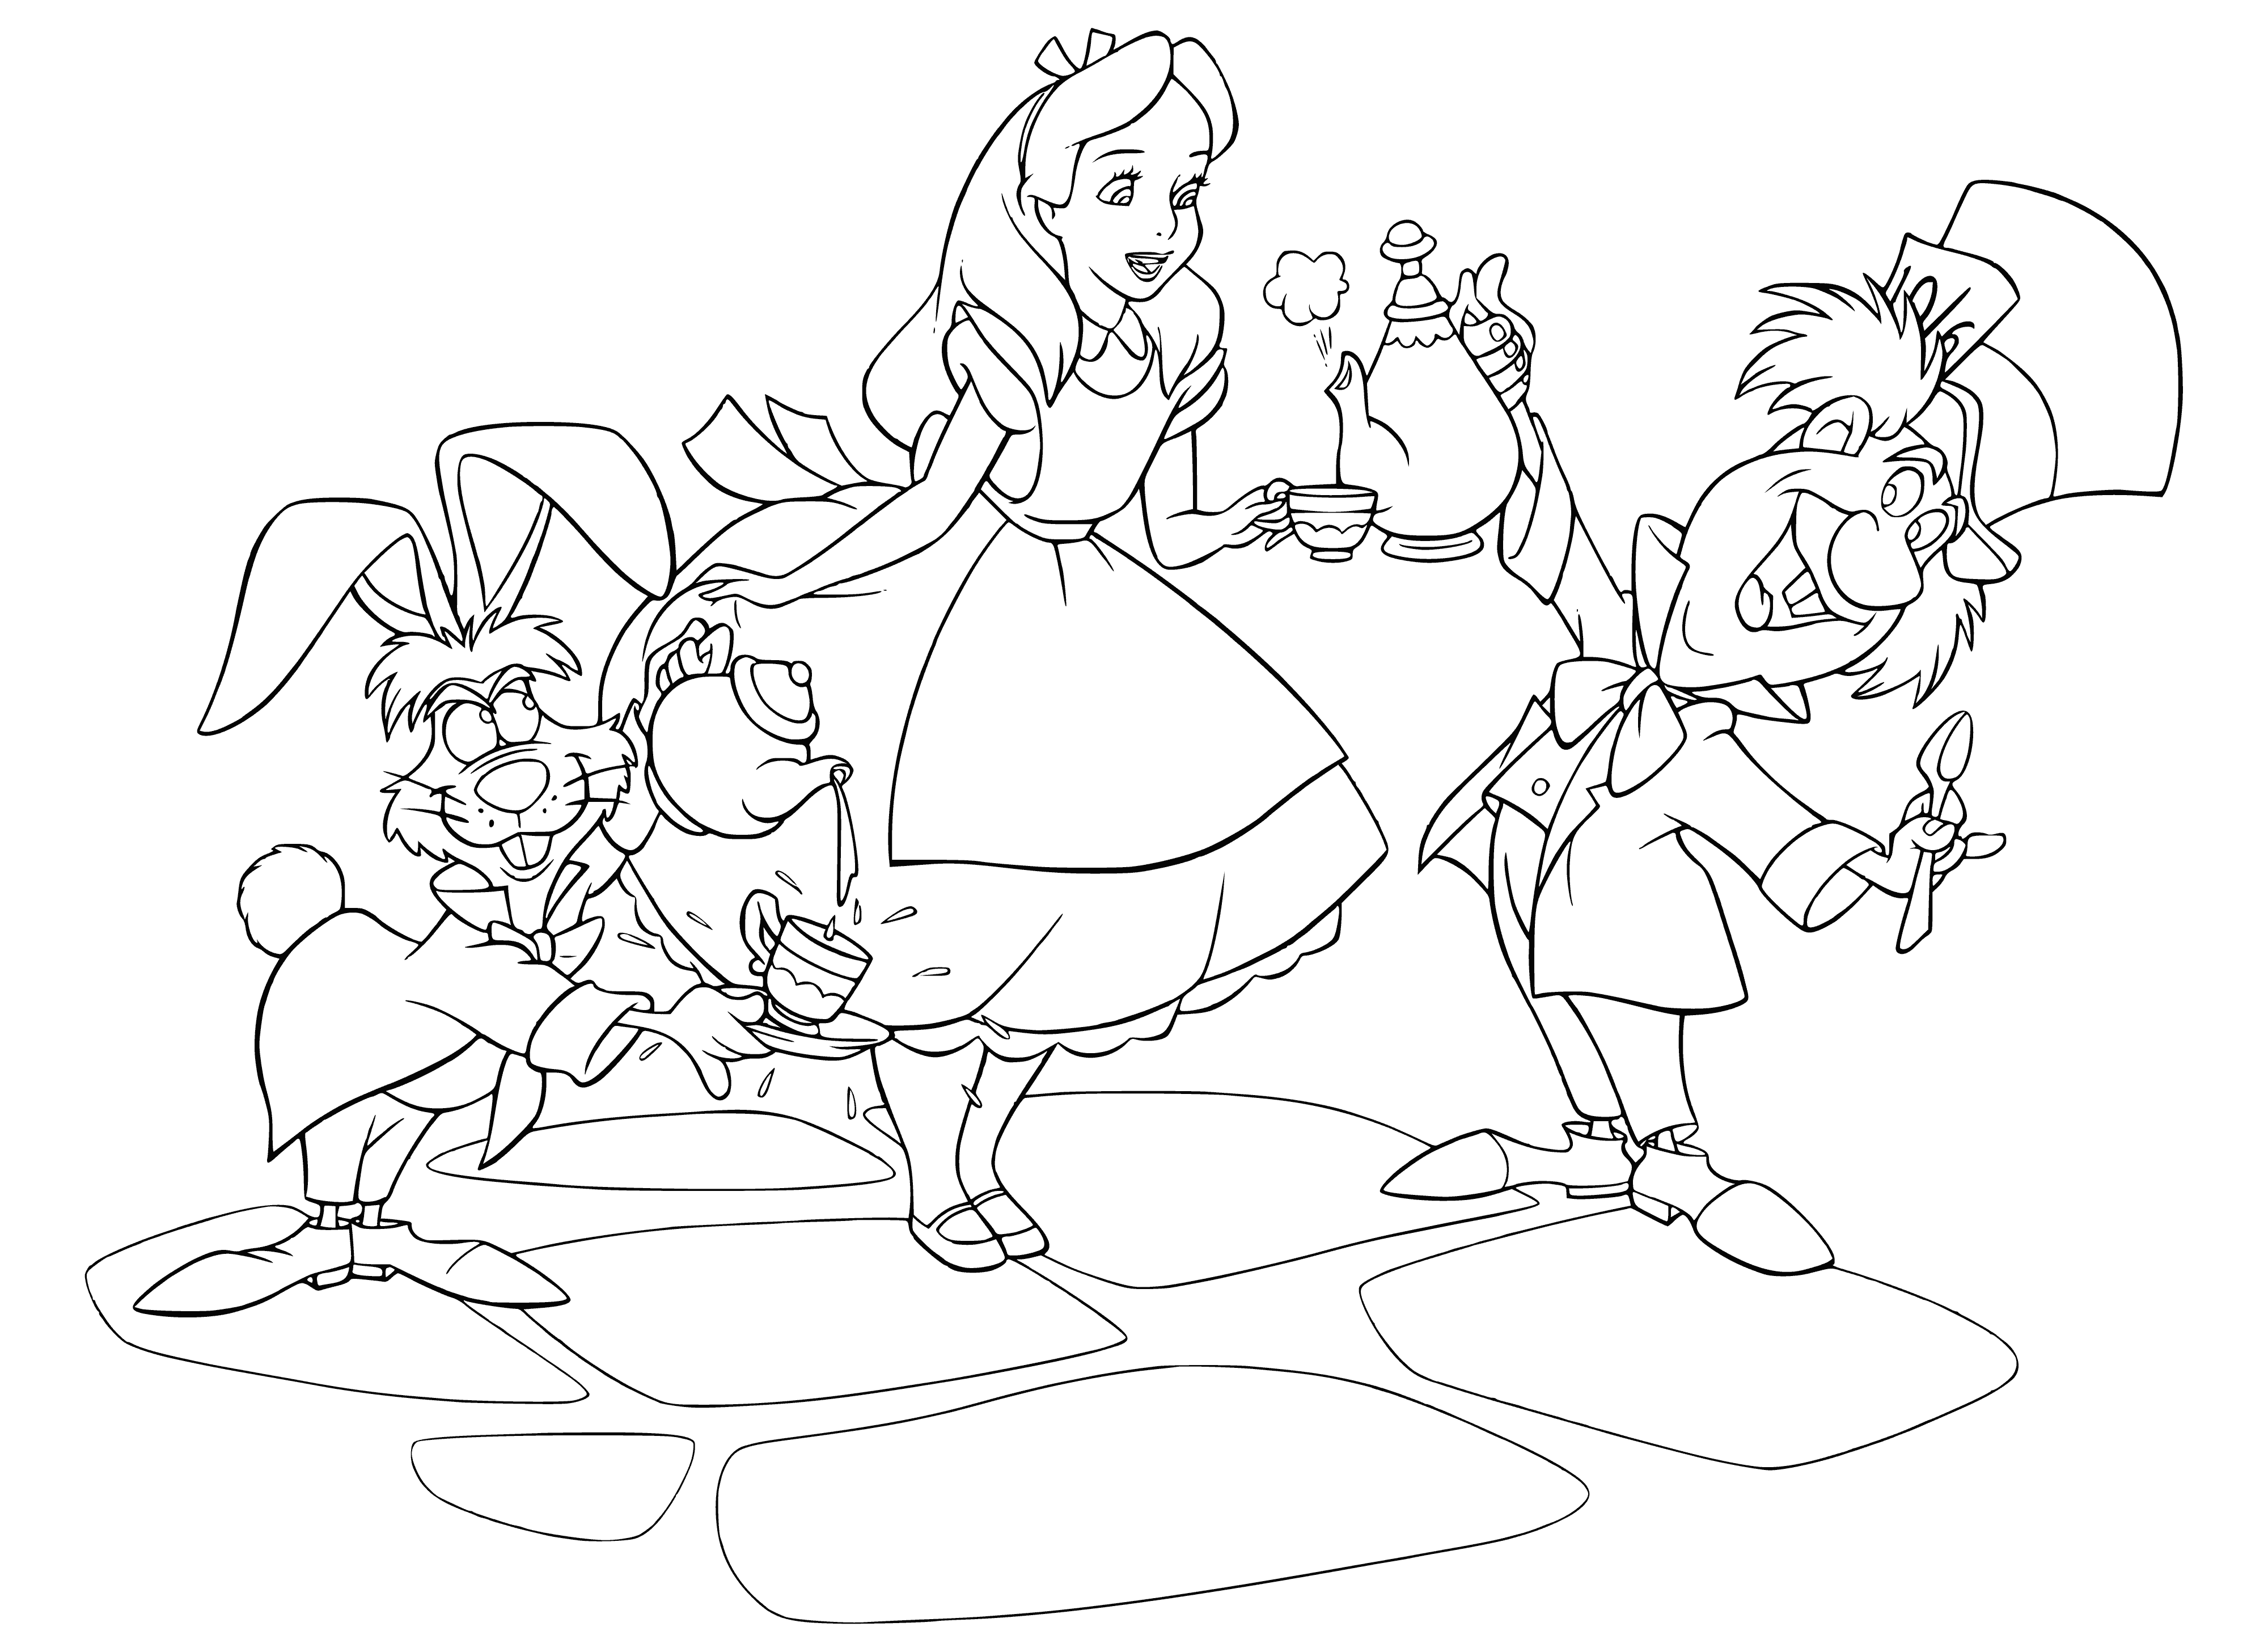 The March Hare, Alice and the Hatter coloring page